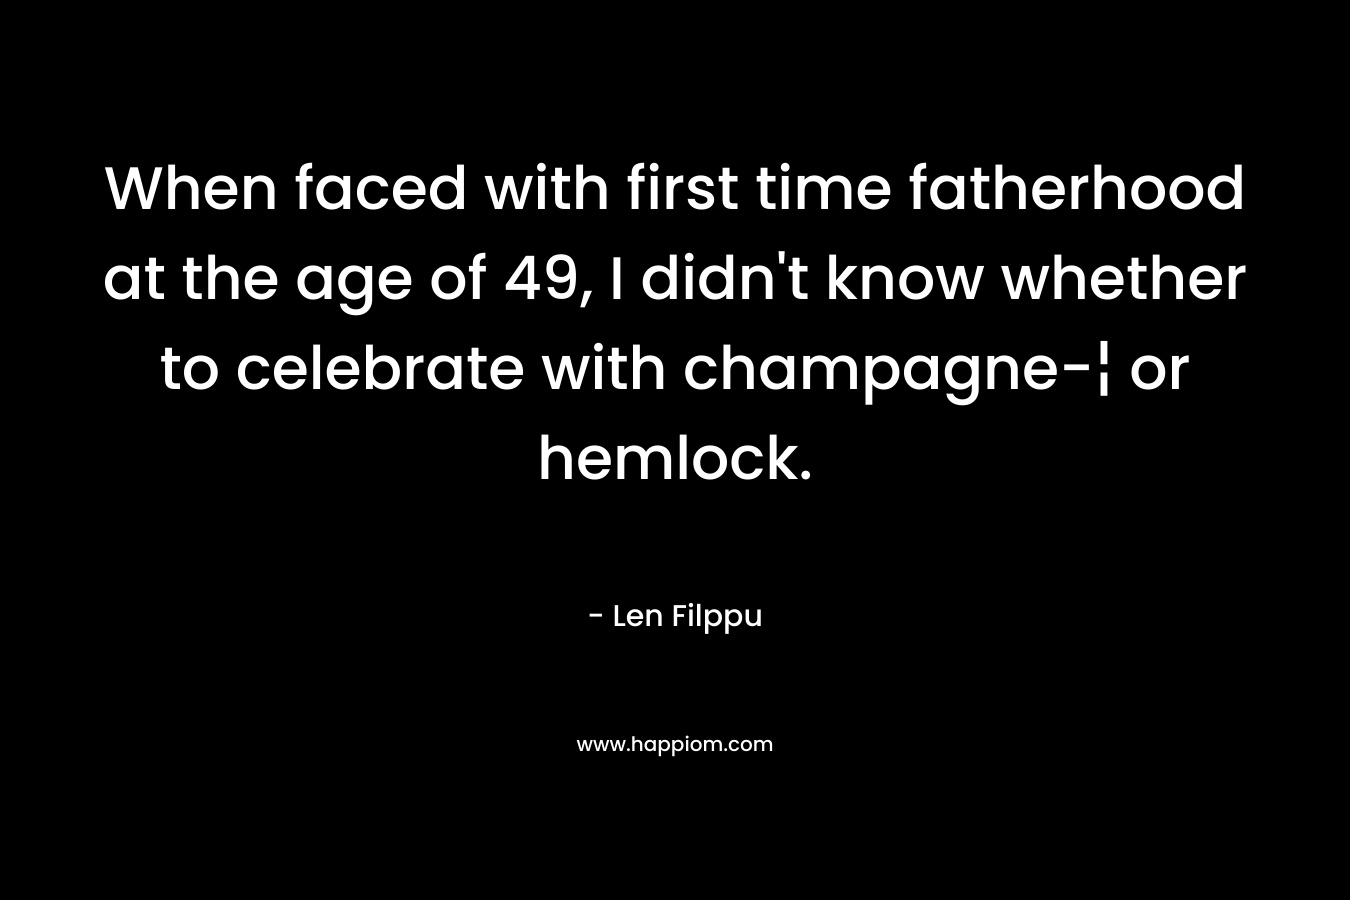 When faced with first time fatherhood at the age of 49, I didn’t know whether to celebrate with champagne-¦ or hemlock. – Len Filppu